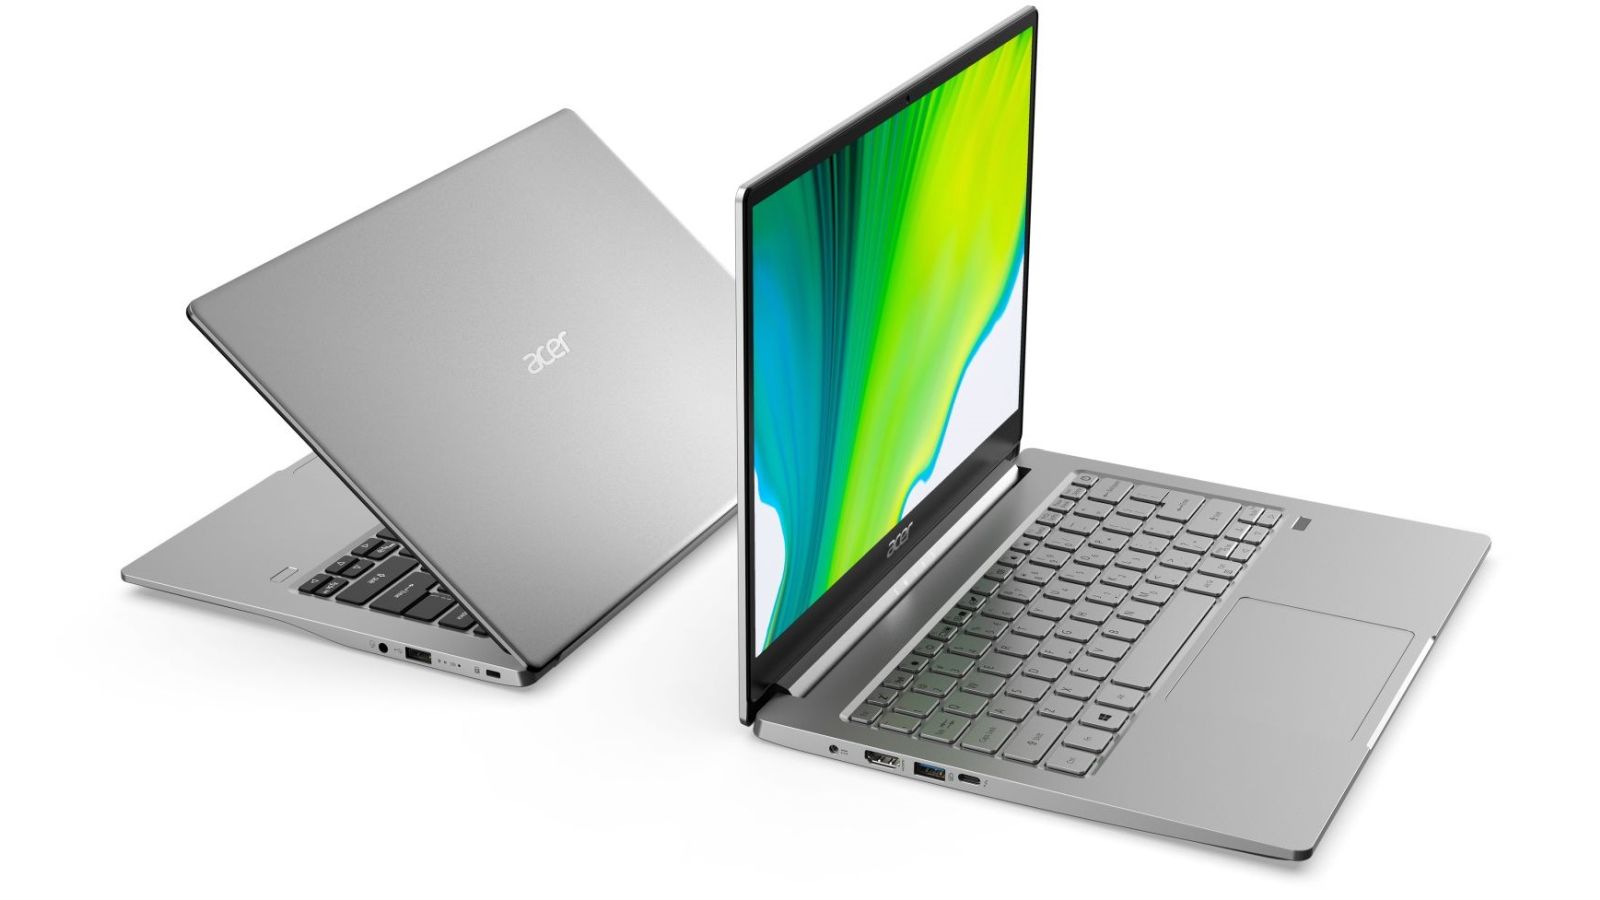 acer-announced-new-displays-desktops-pc-portables-workstations-at-ces-2020